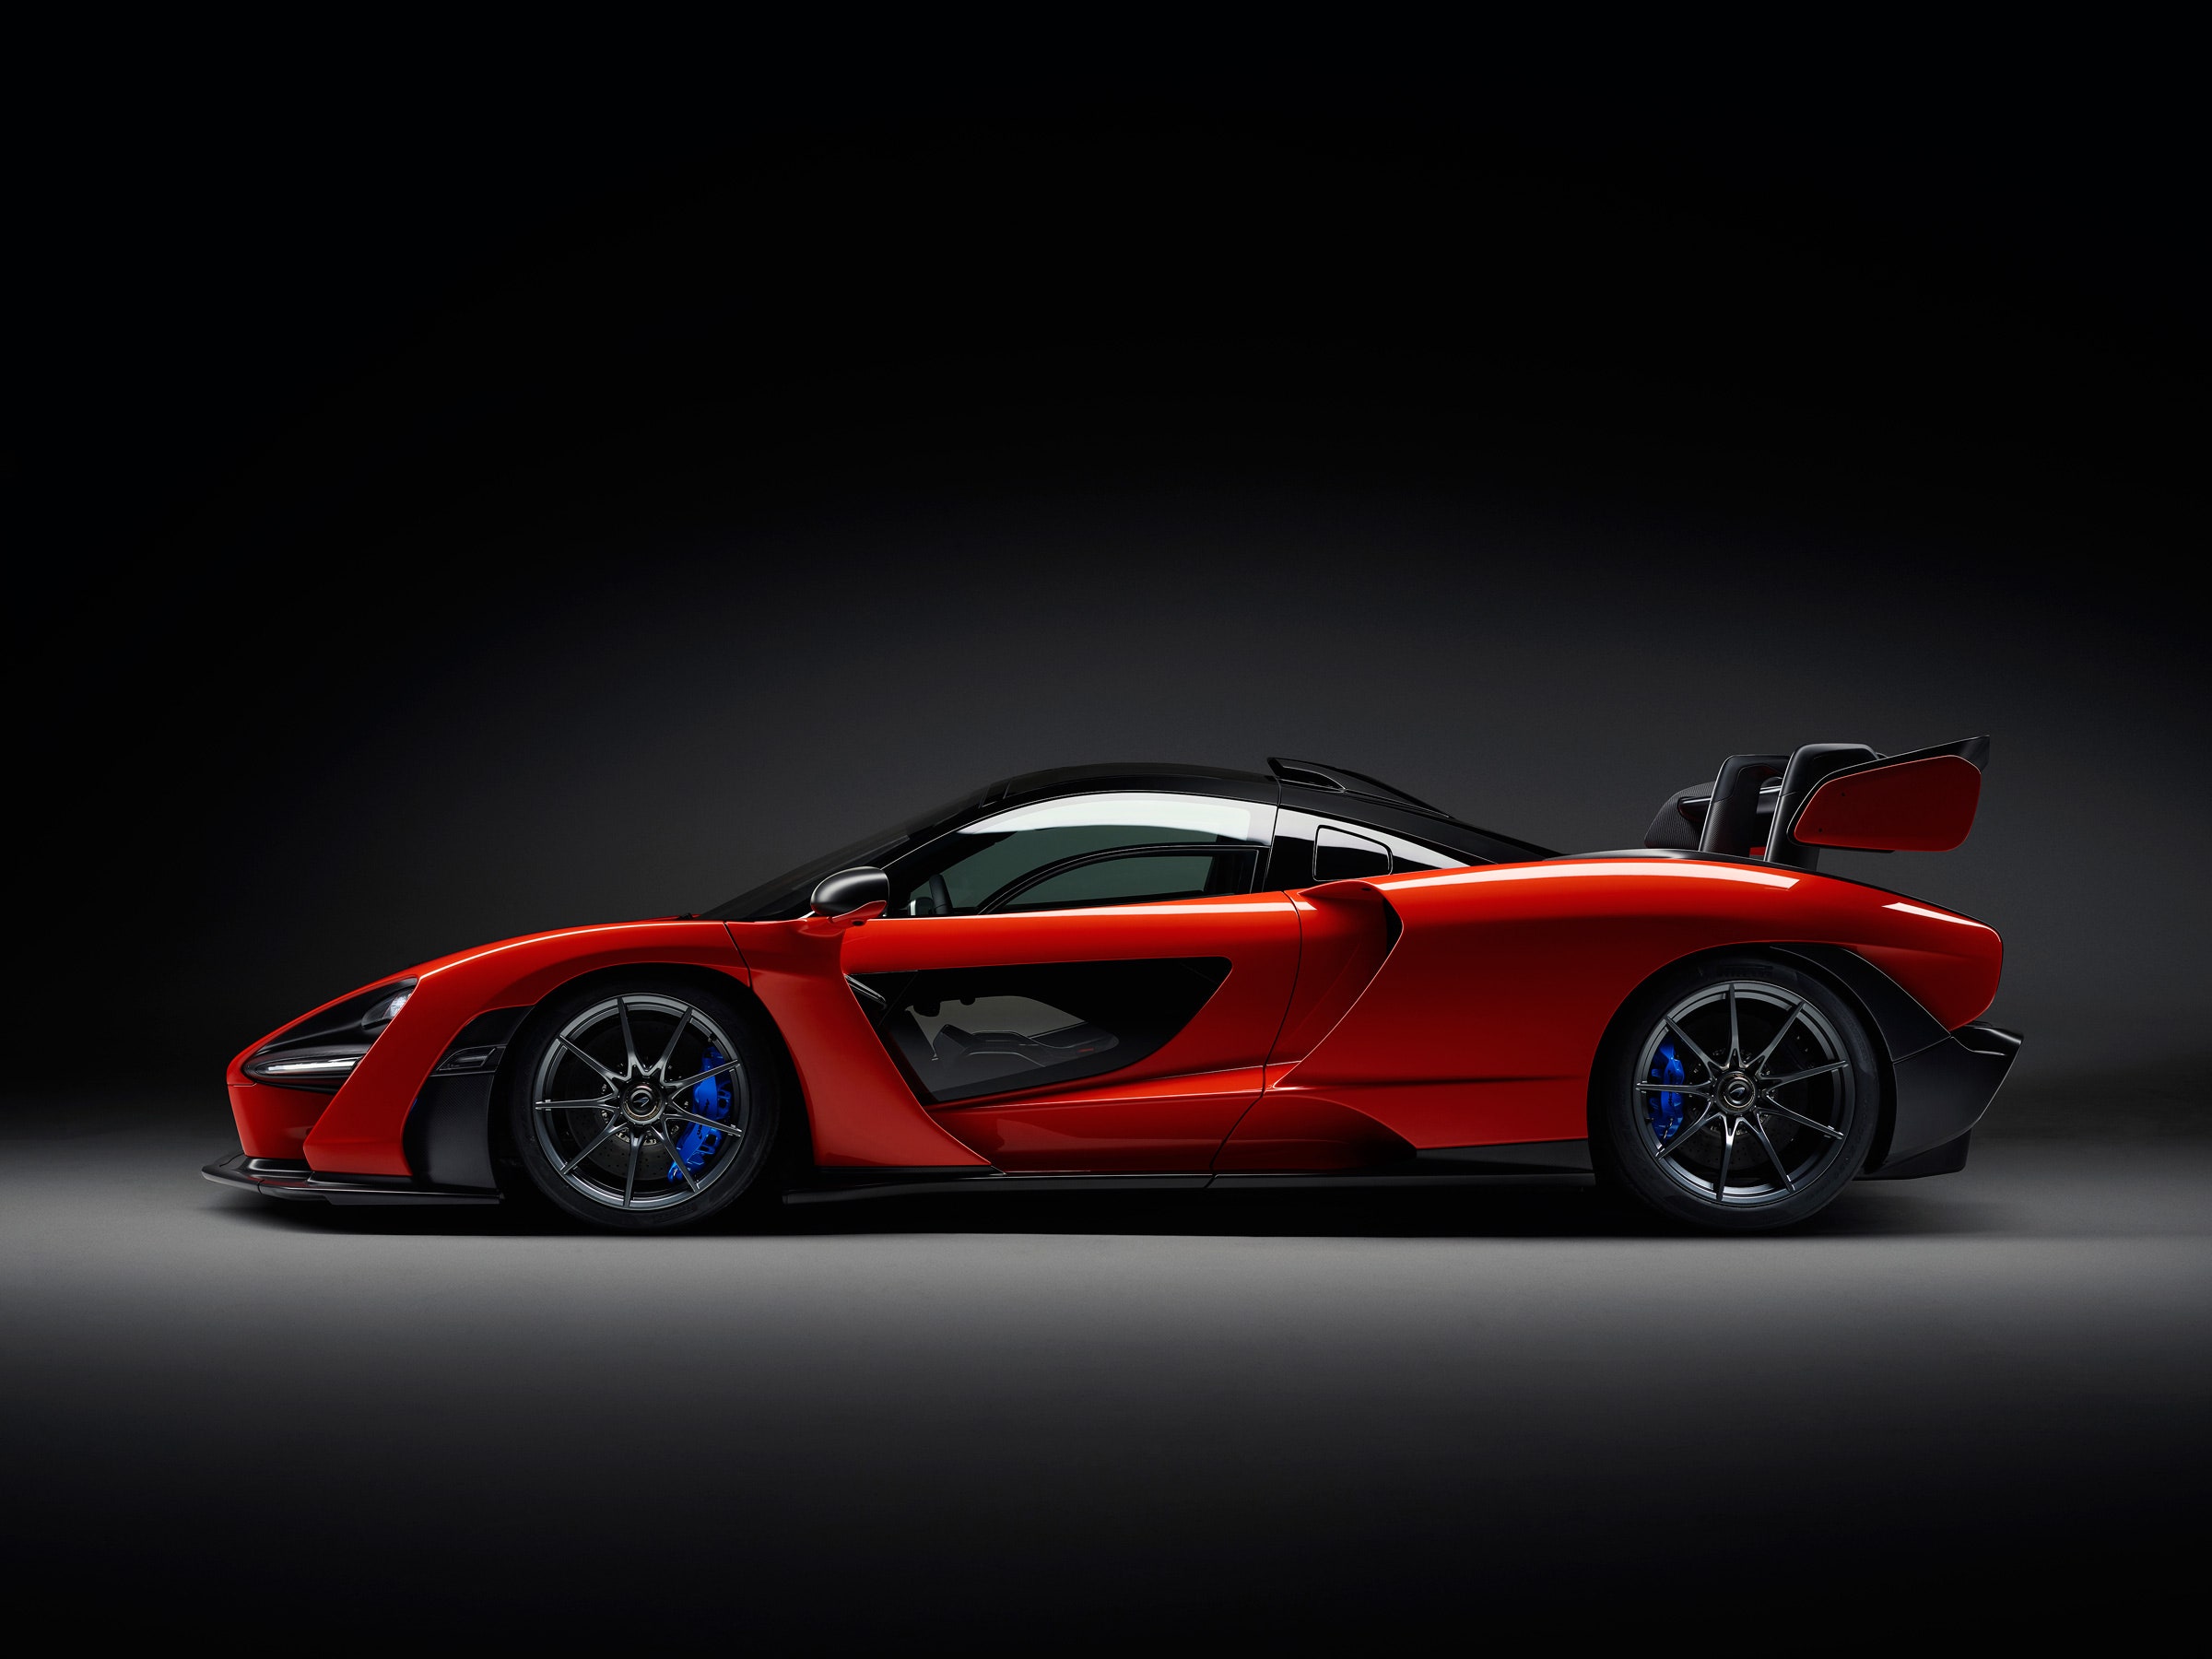 McLaren's Senna Supercar Delivers Wild Performance, Costs a Million Dollars  | WIRED